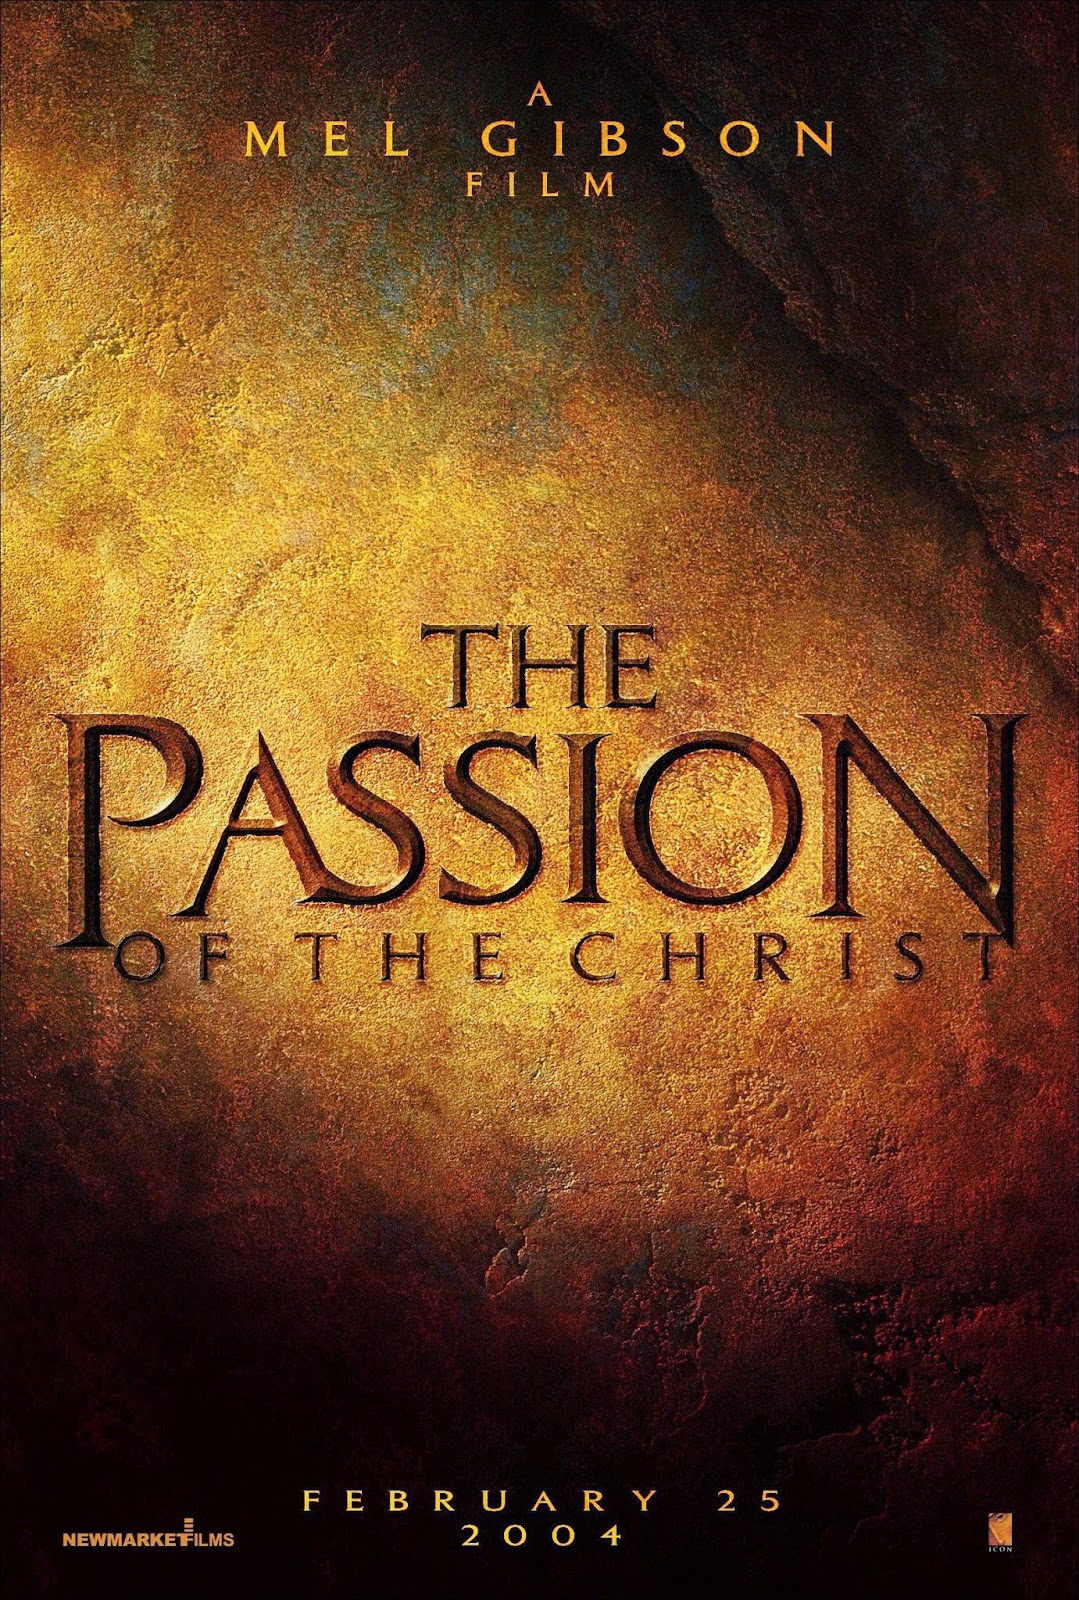 Passion of christ full movie in english mel gibson